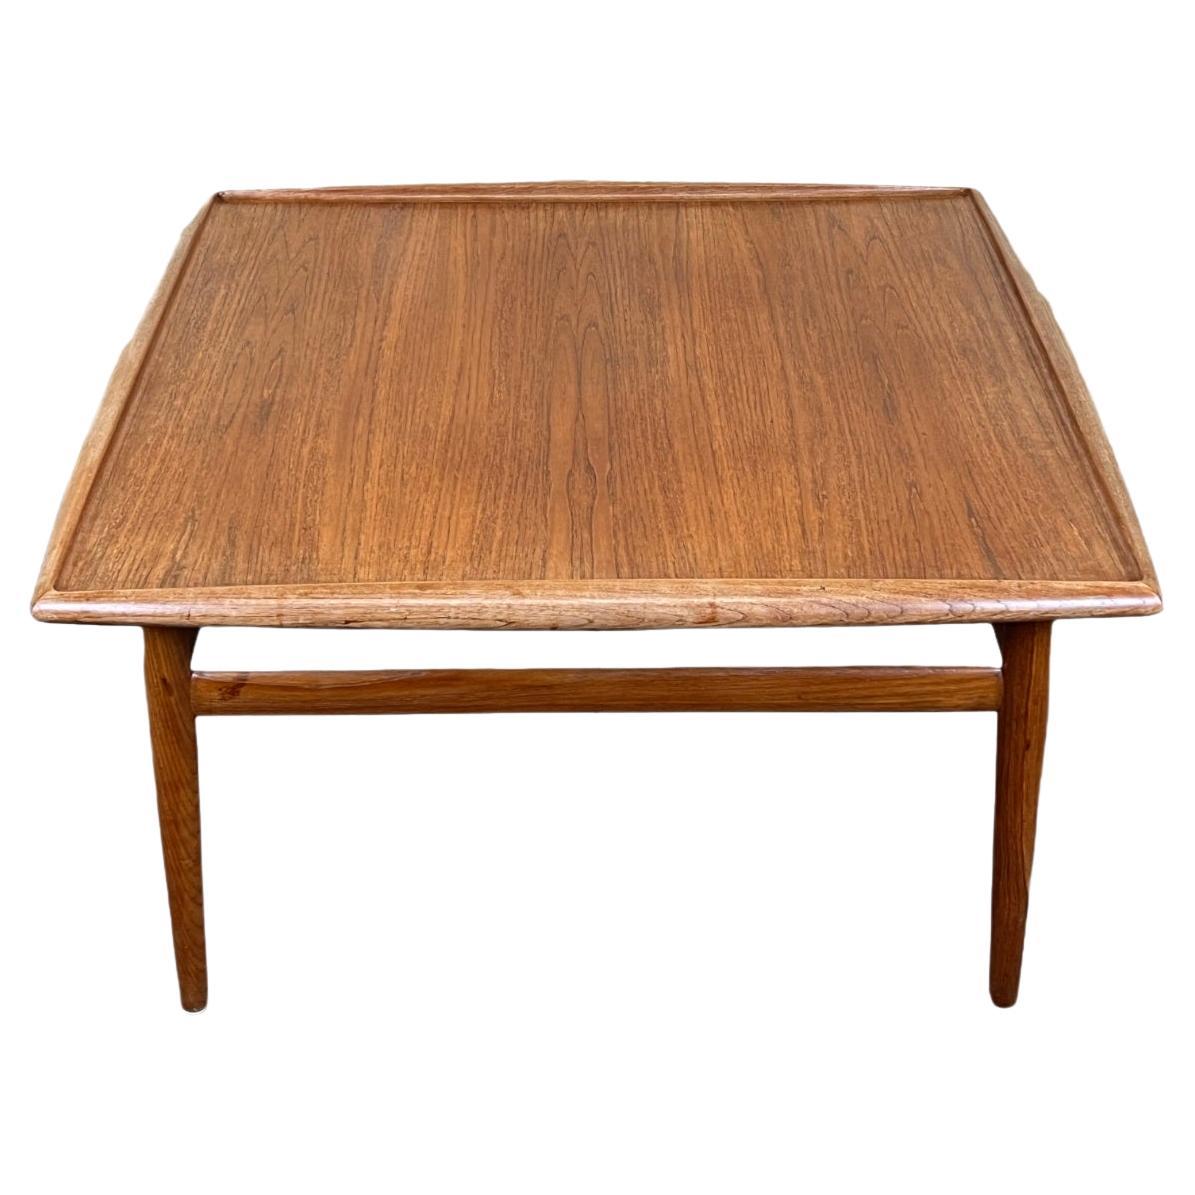 60s 70s large teak coffee table side table Grete Jalk for Glostrup